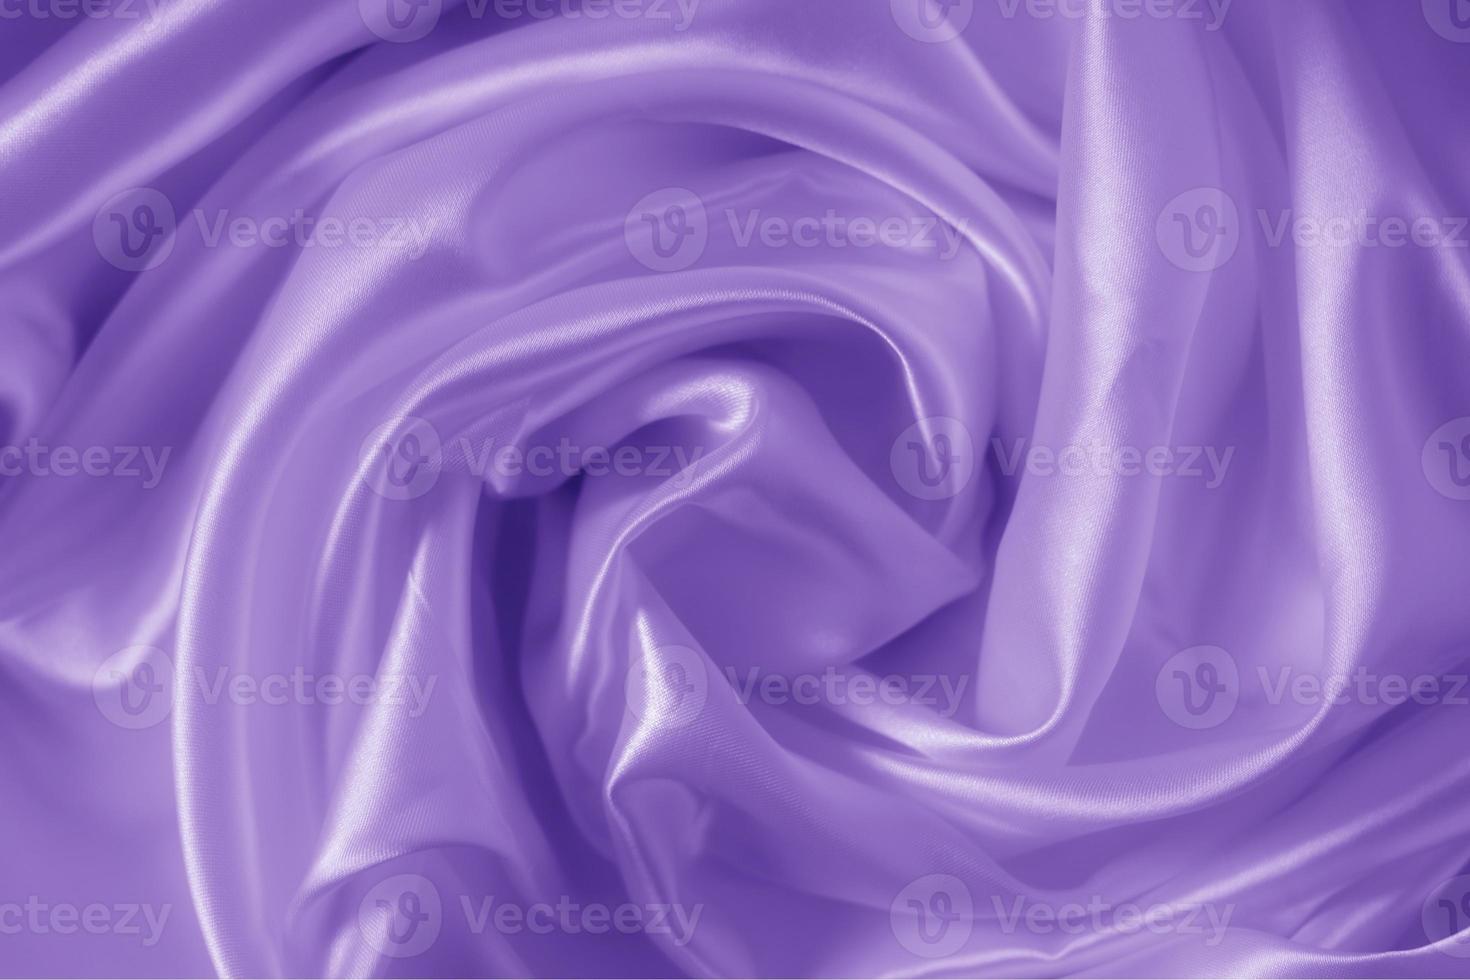 The texture of the proton purple cloth with waves and shrugs. Shiny fabric. photo